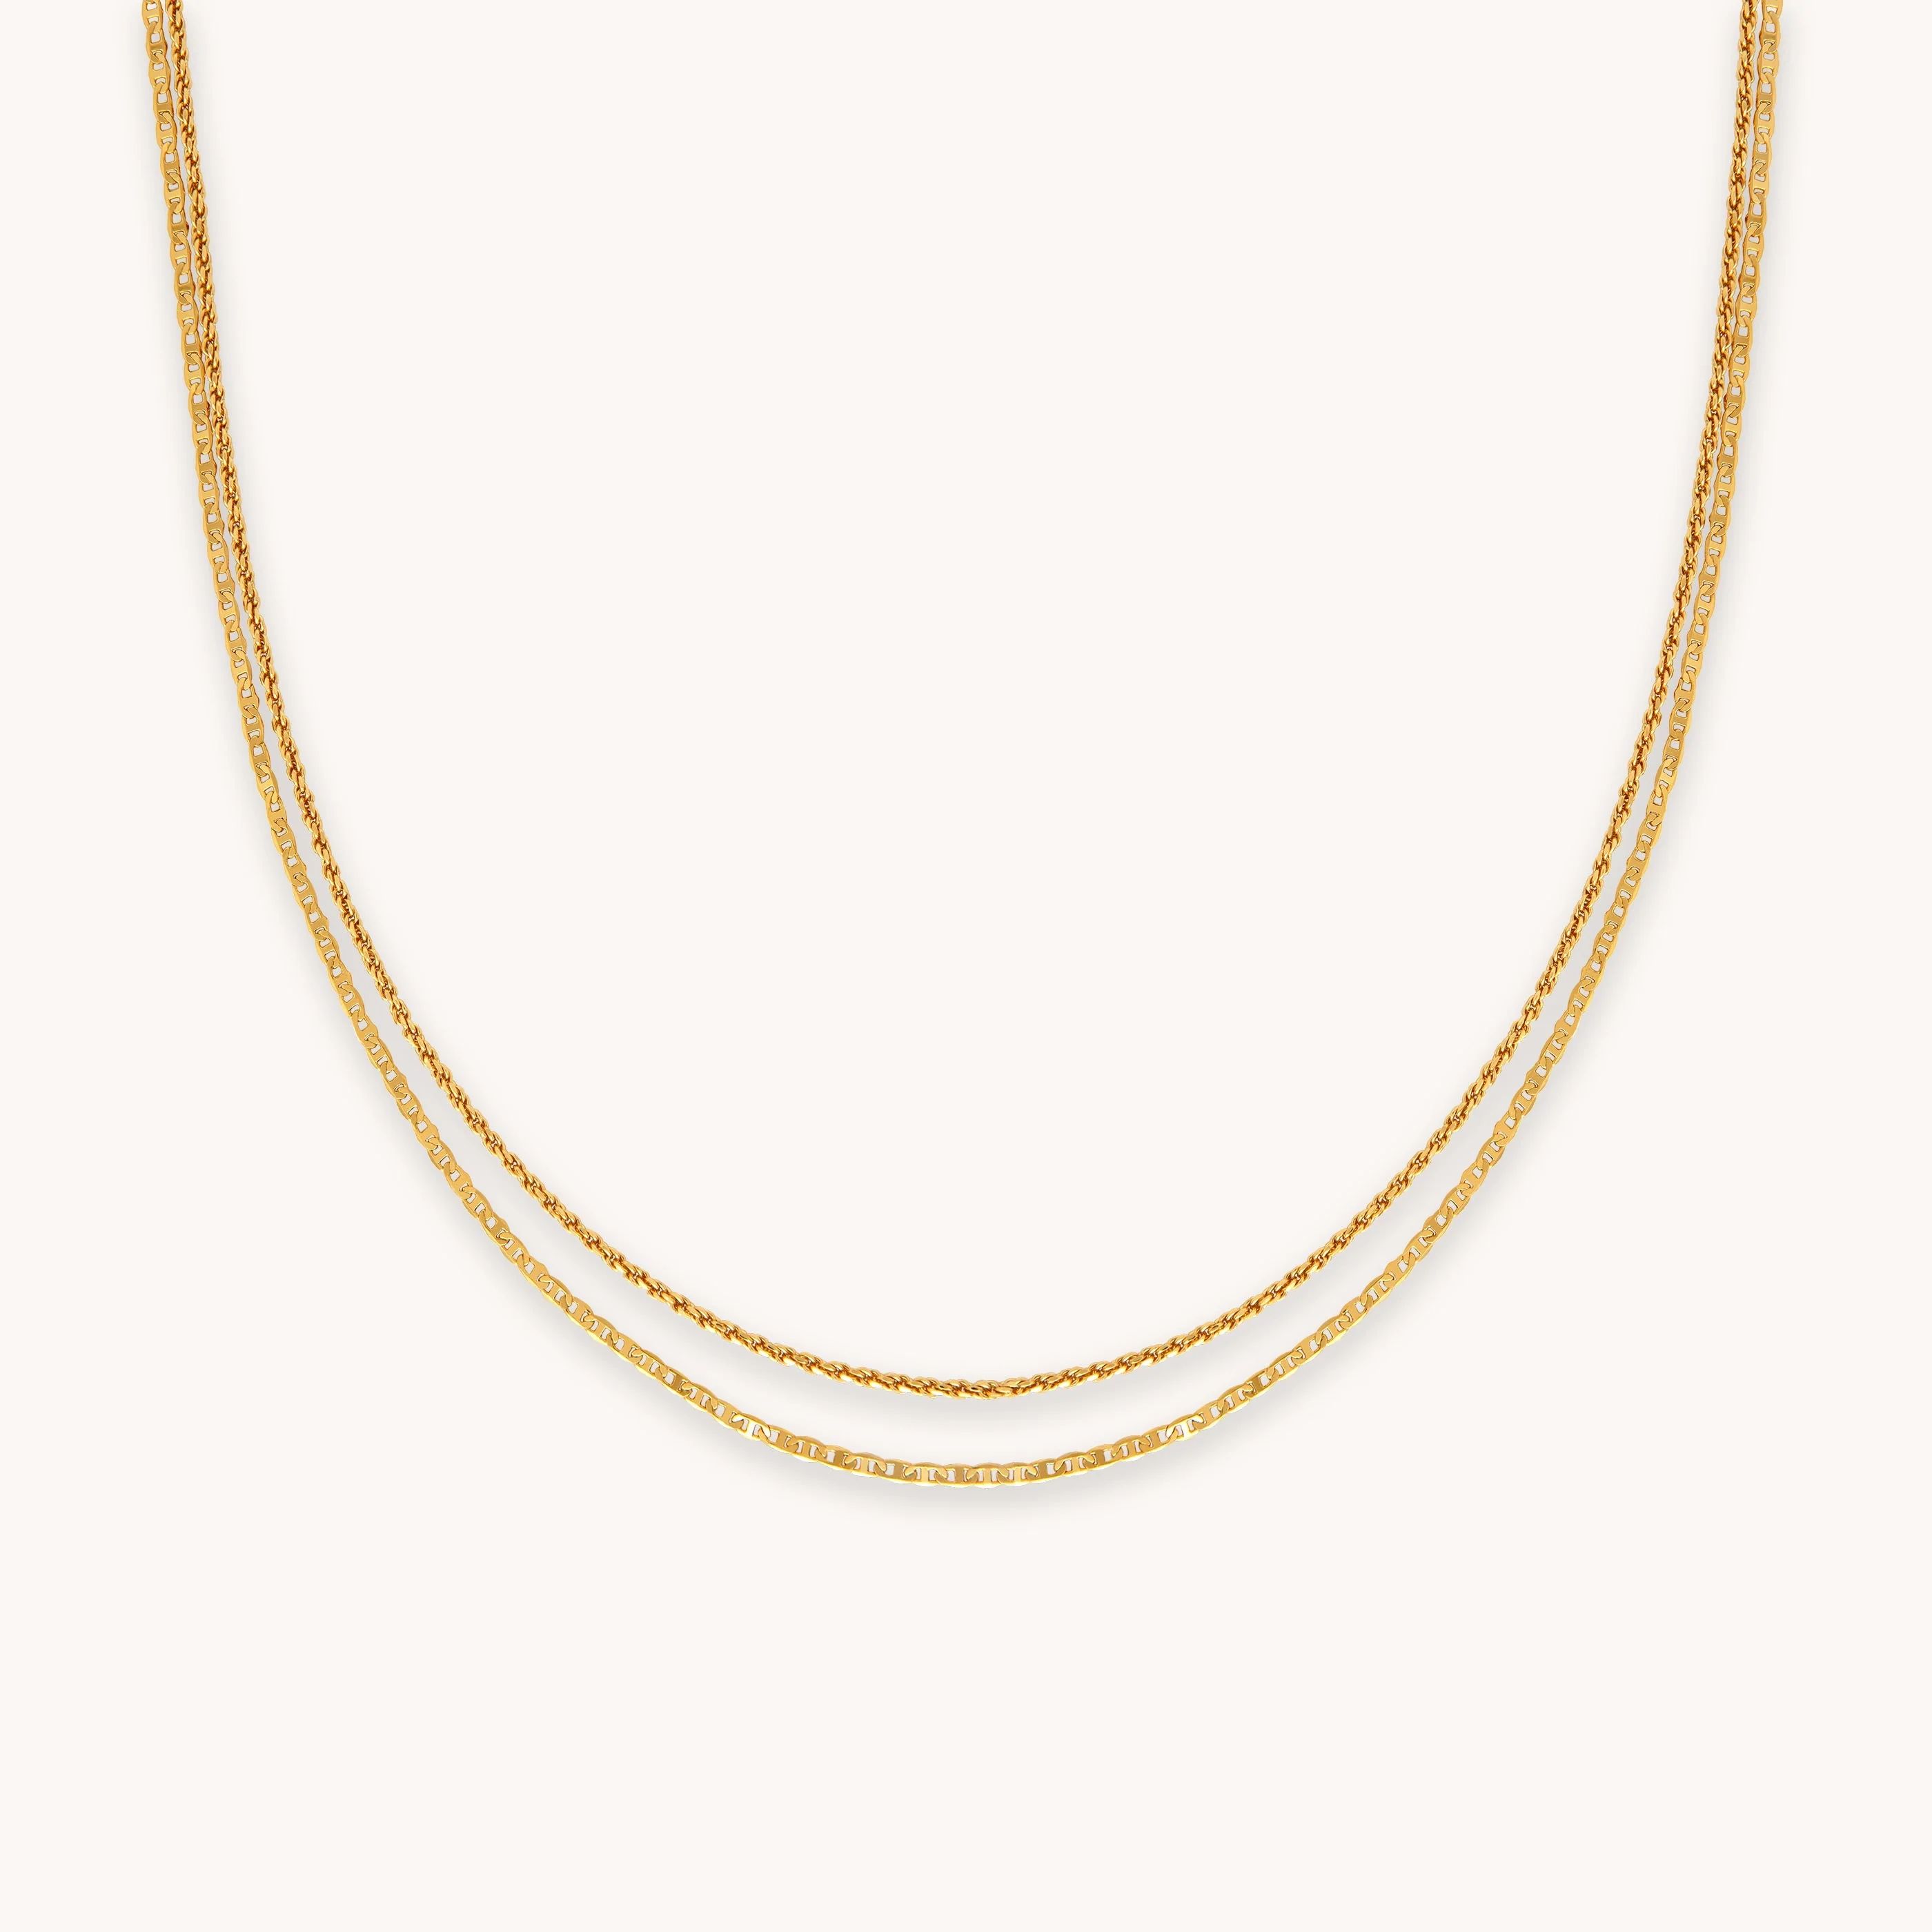 Double Chain Gold Necklace | Astrid & Miyu Necklaces | Astrid and Miyu